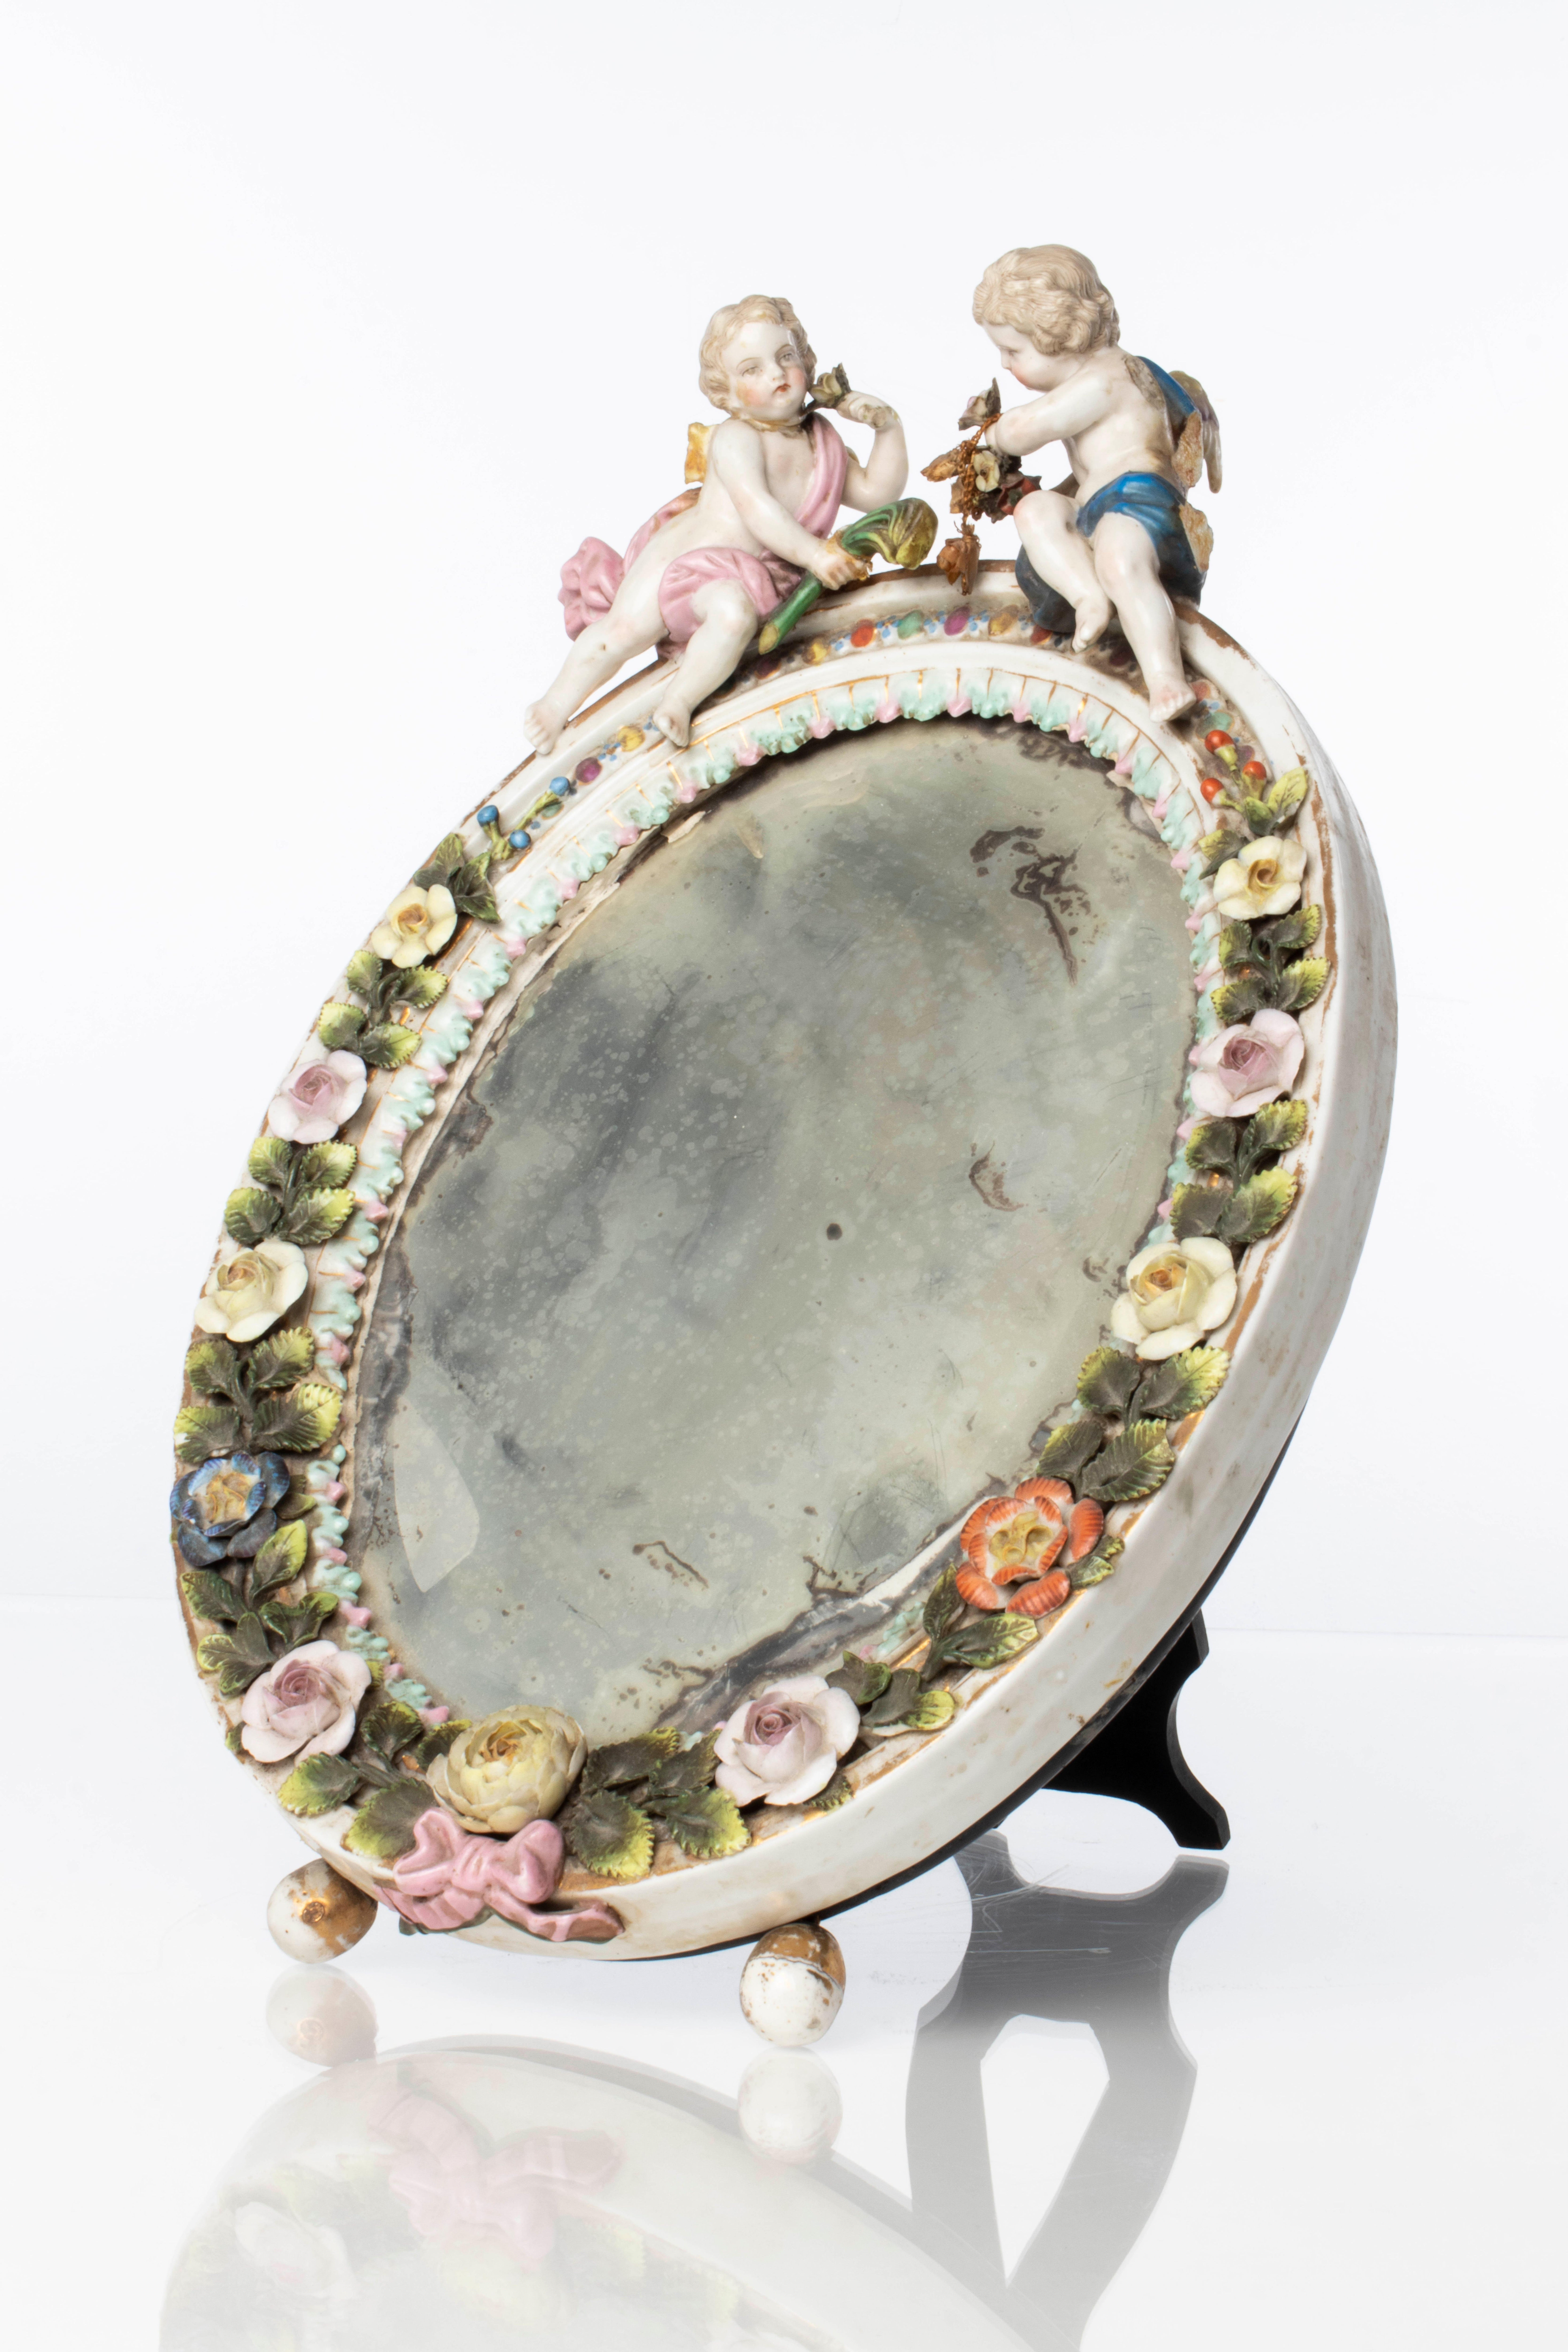 German paint decorated porcelain mirror, late 19th century, in the manner of Meissen or Dresden, the crest with winged cherubs above the applied flowers and leaves, the base centered with a bow and with two round feet, all around a beveled mirror